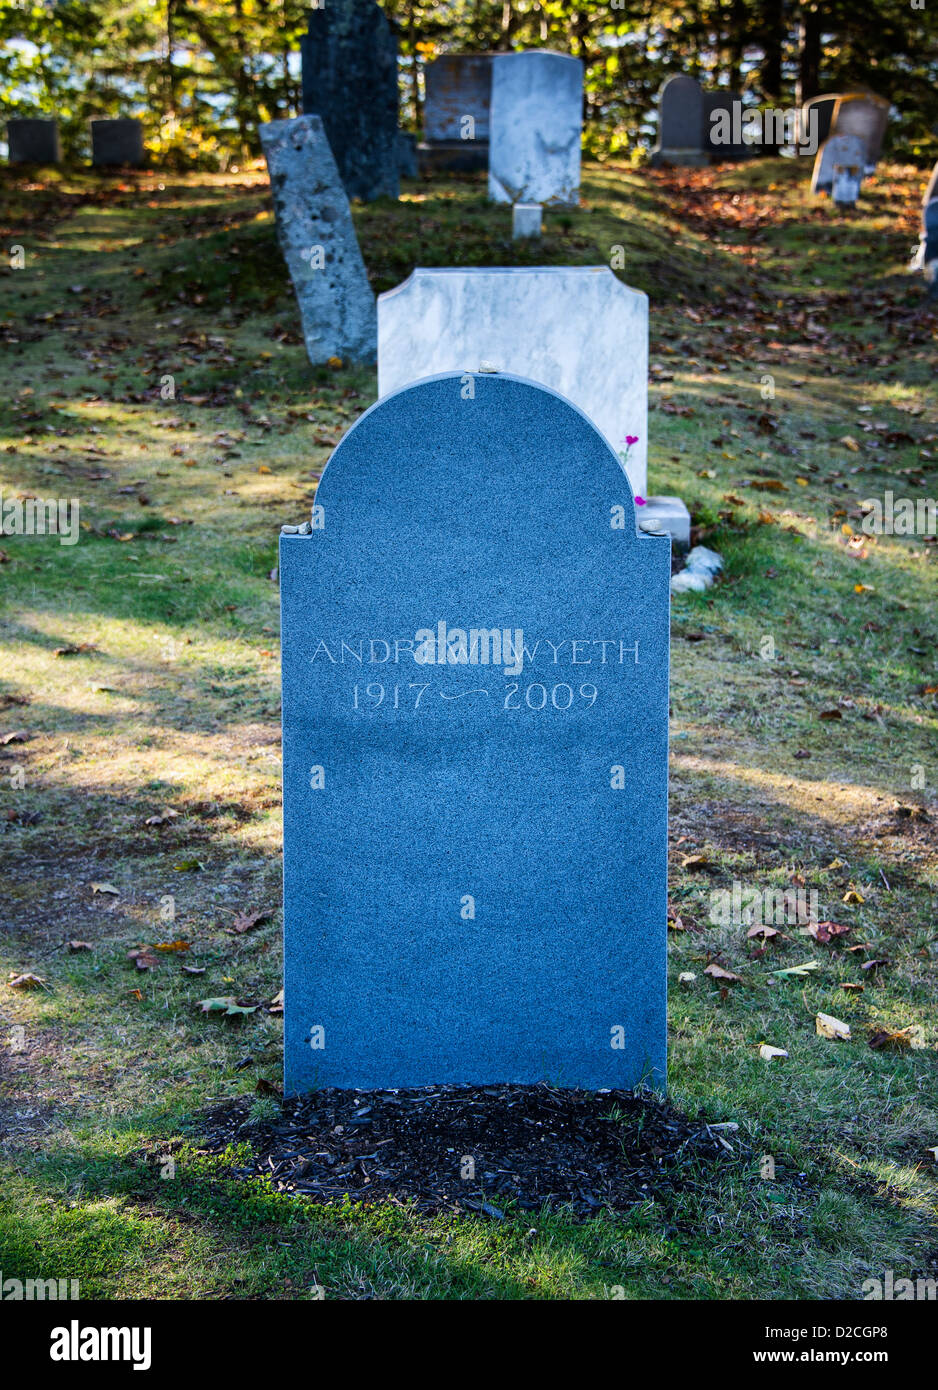 Burial site of American artist Andrew Wyeth, Cushing, Maine, USA Stock Photo